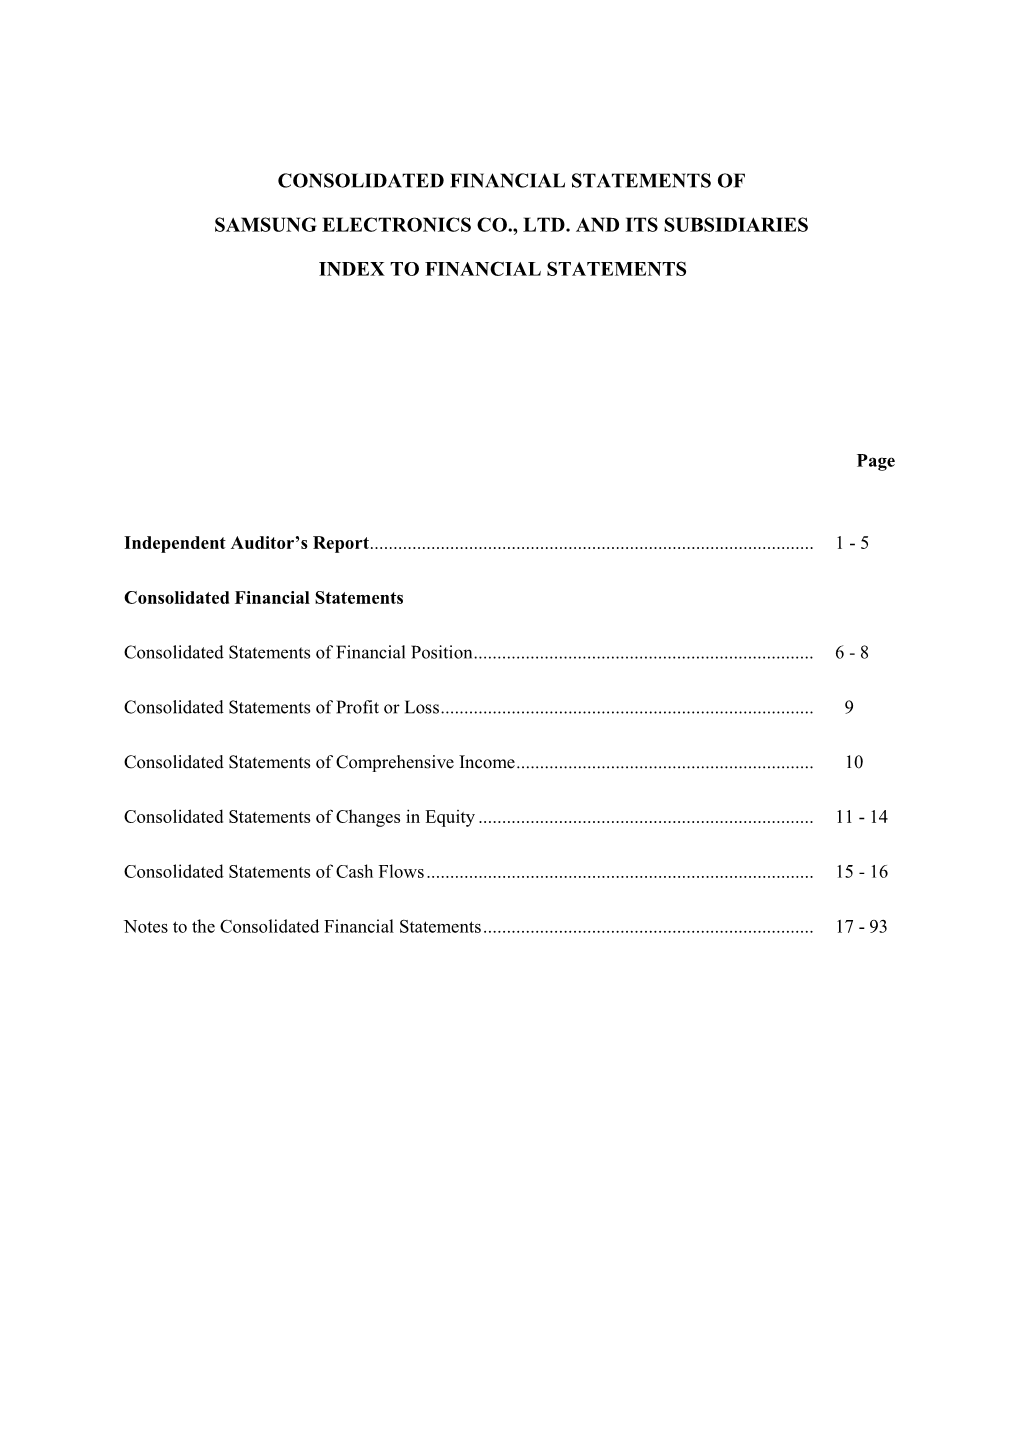 Consolidated Financial Statements of Samsung Electronics Co., Ltd. and Its